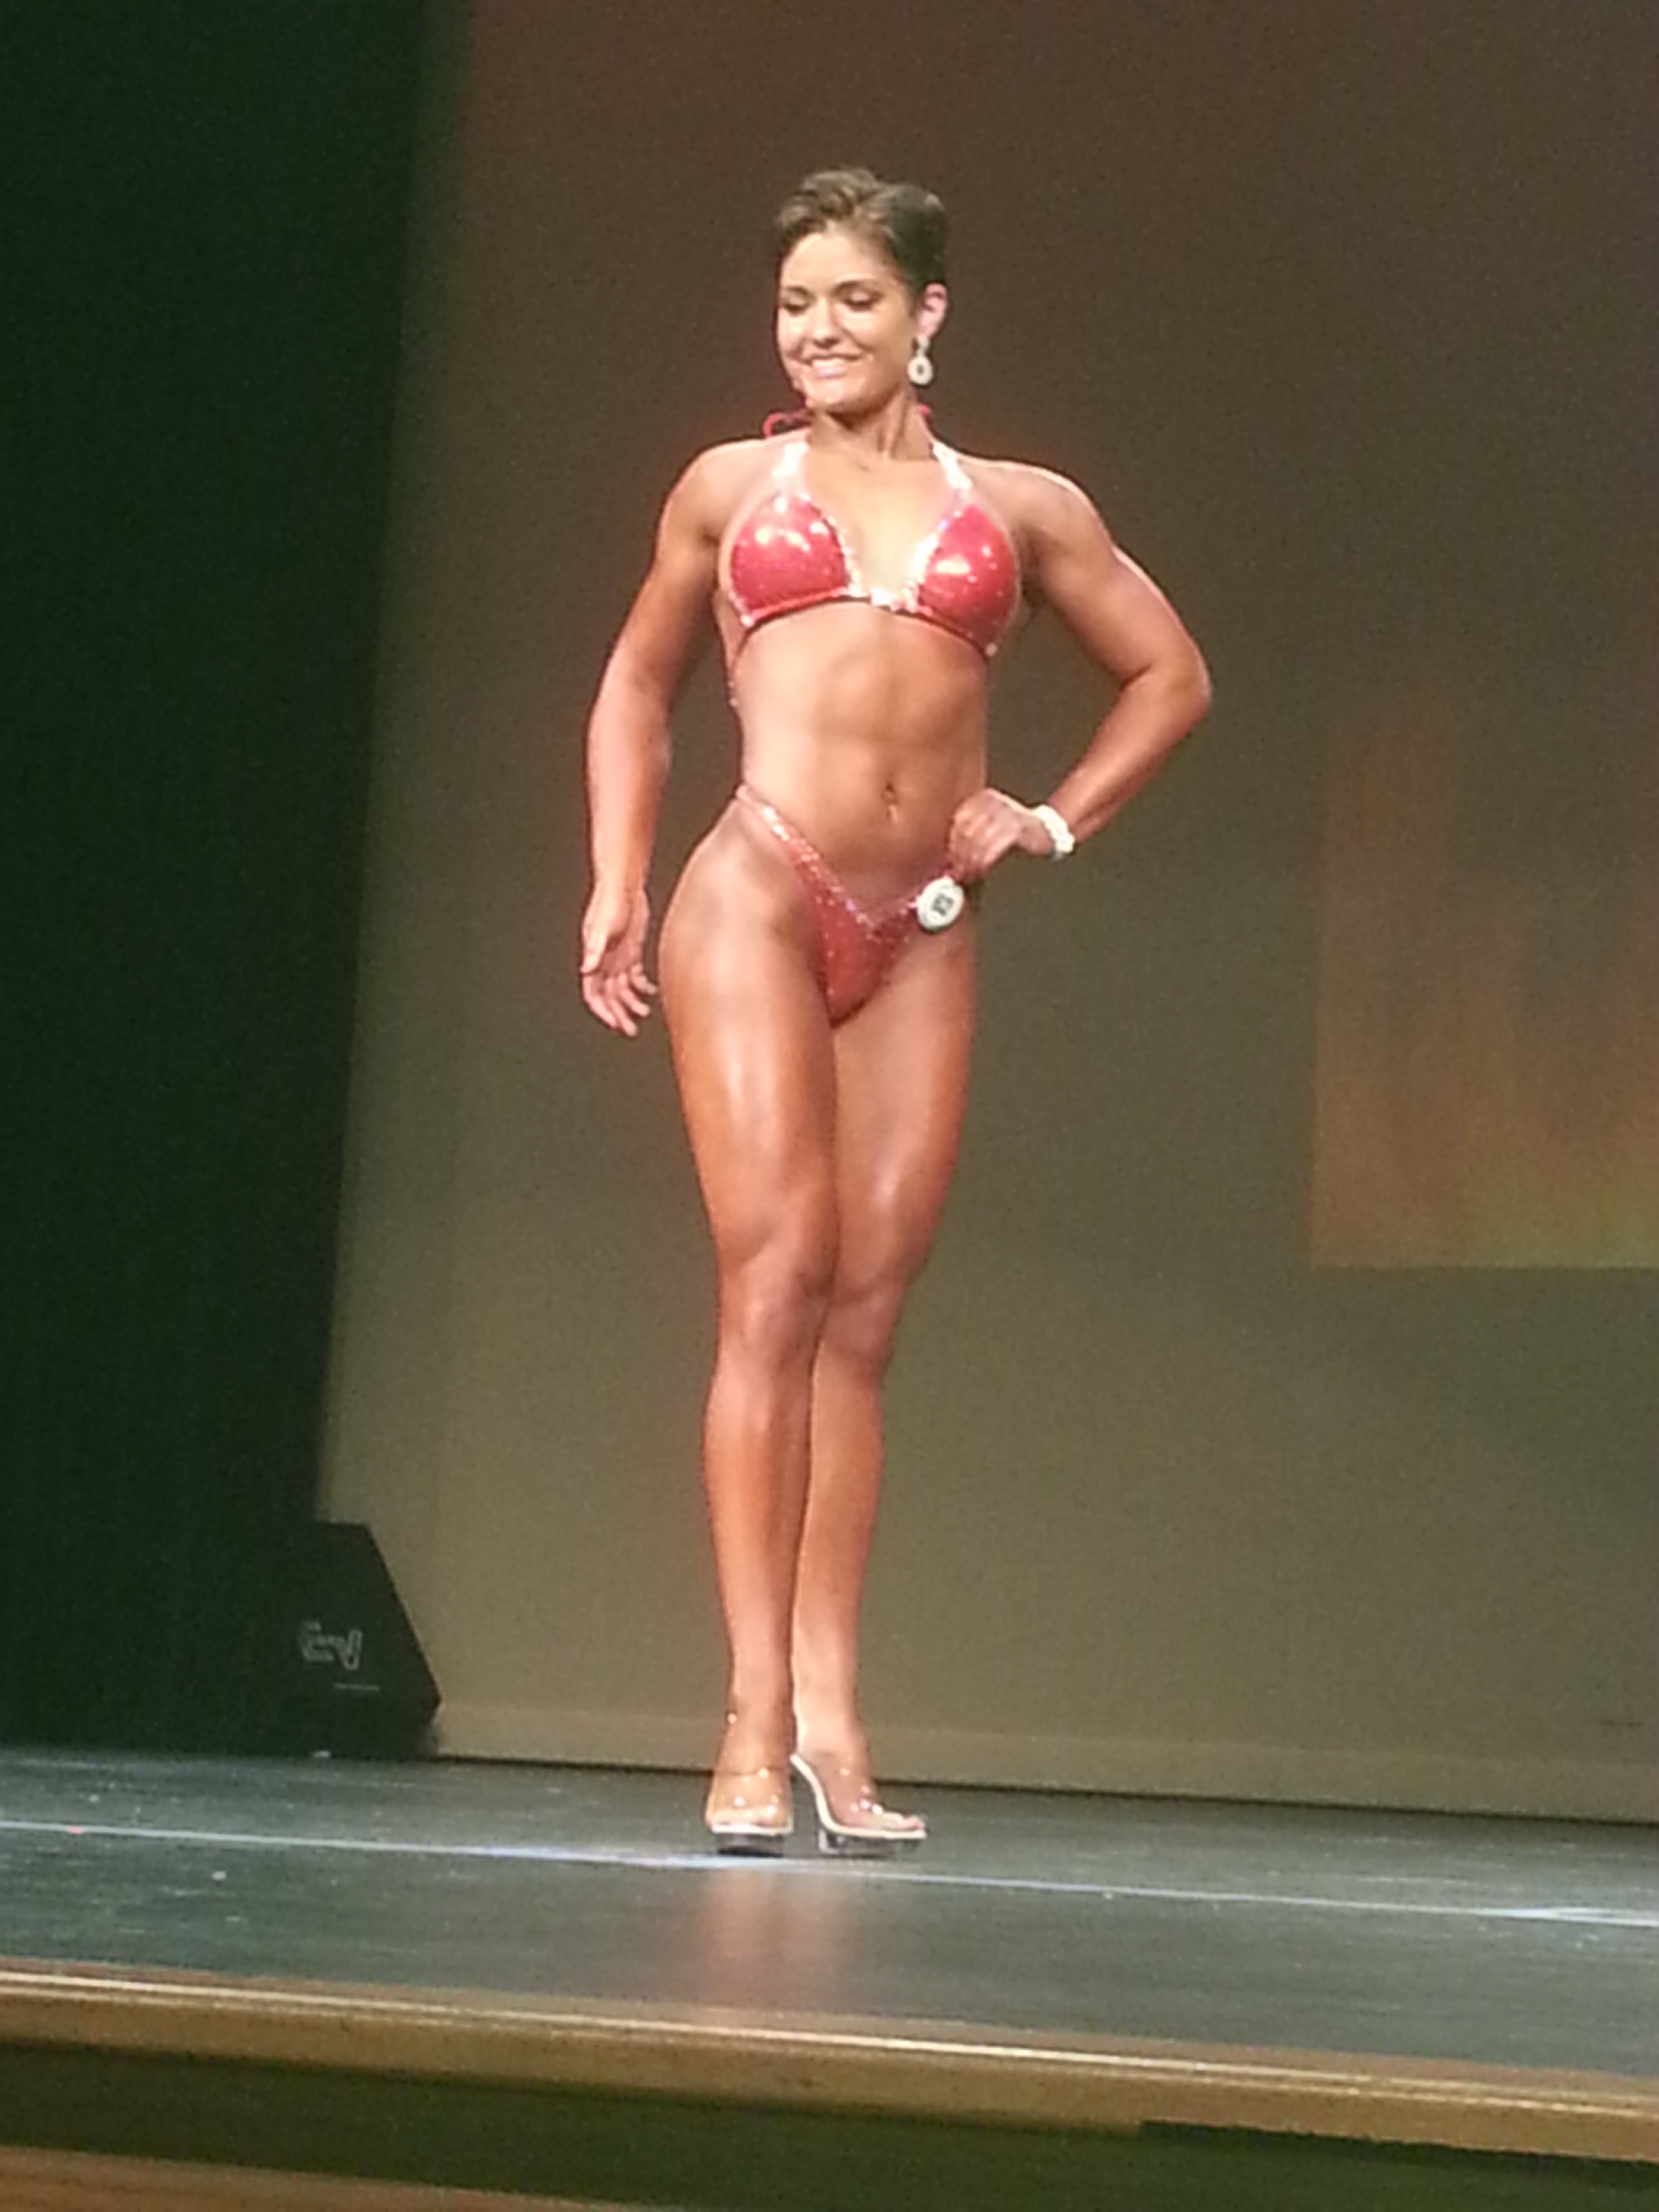 Onstage during pre-judging